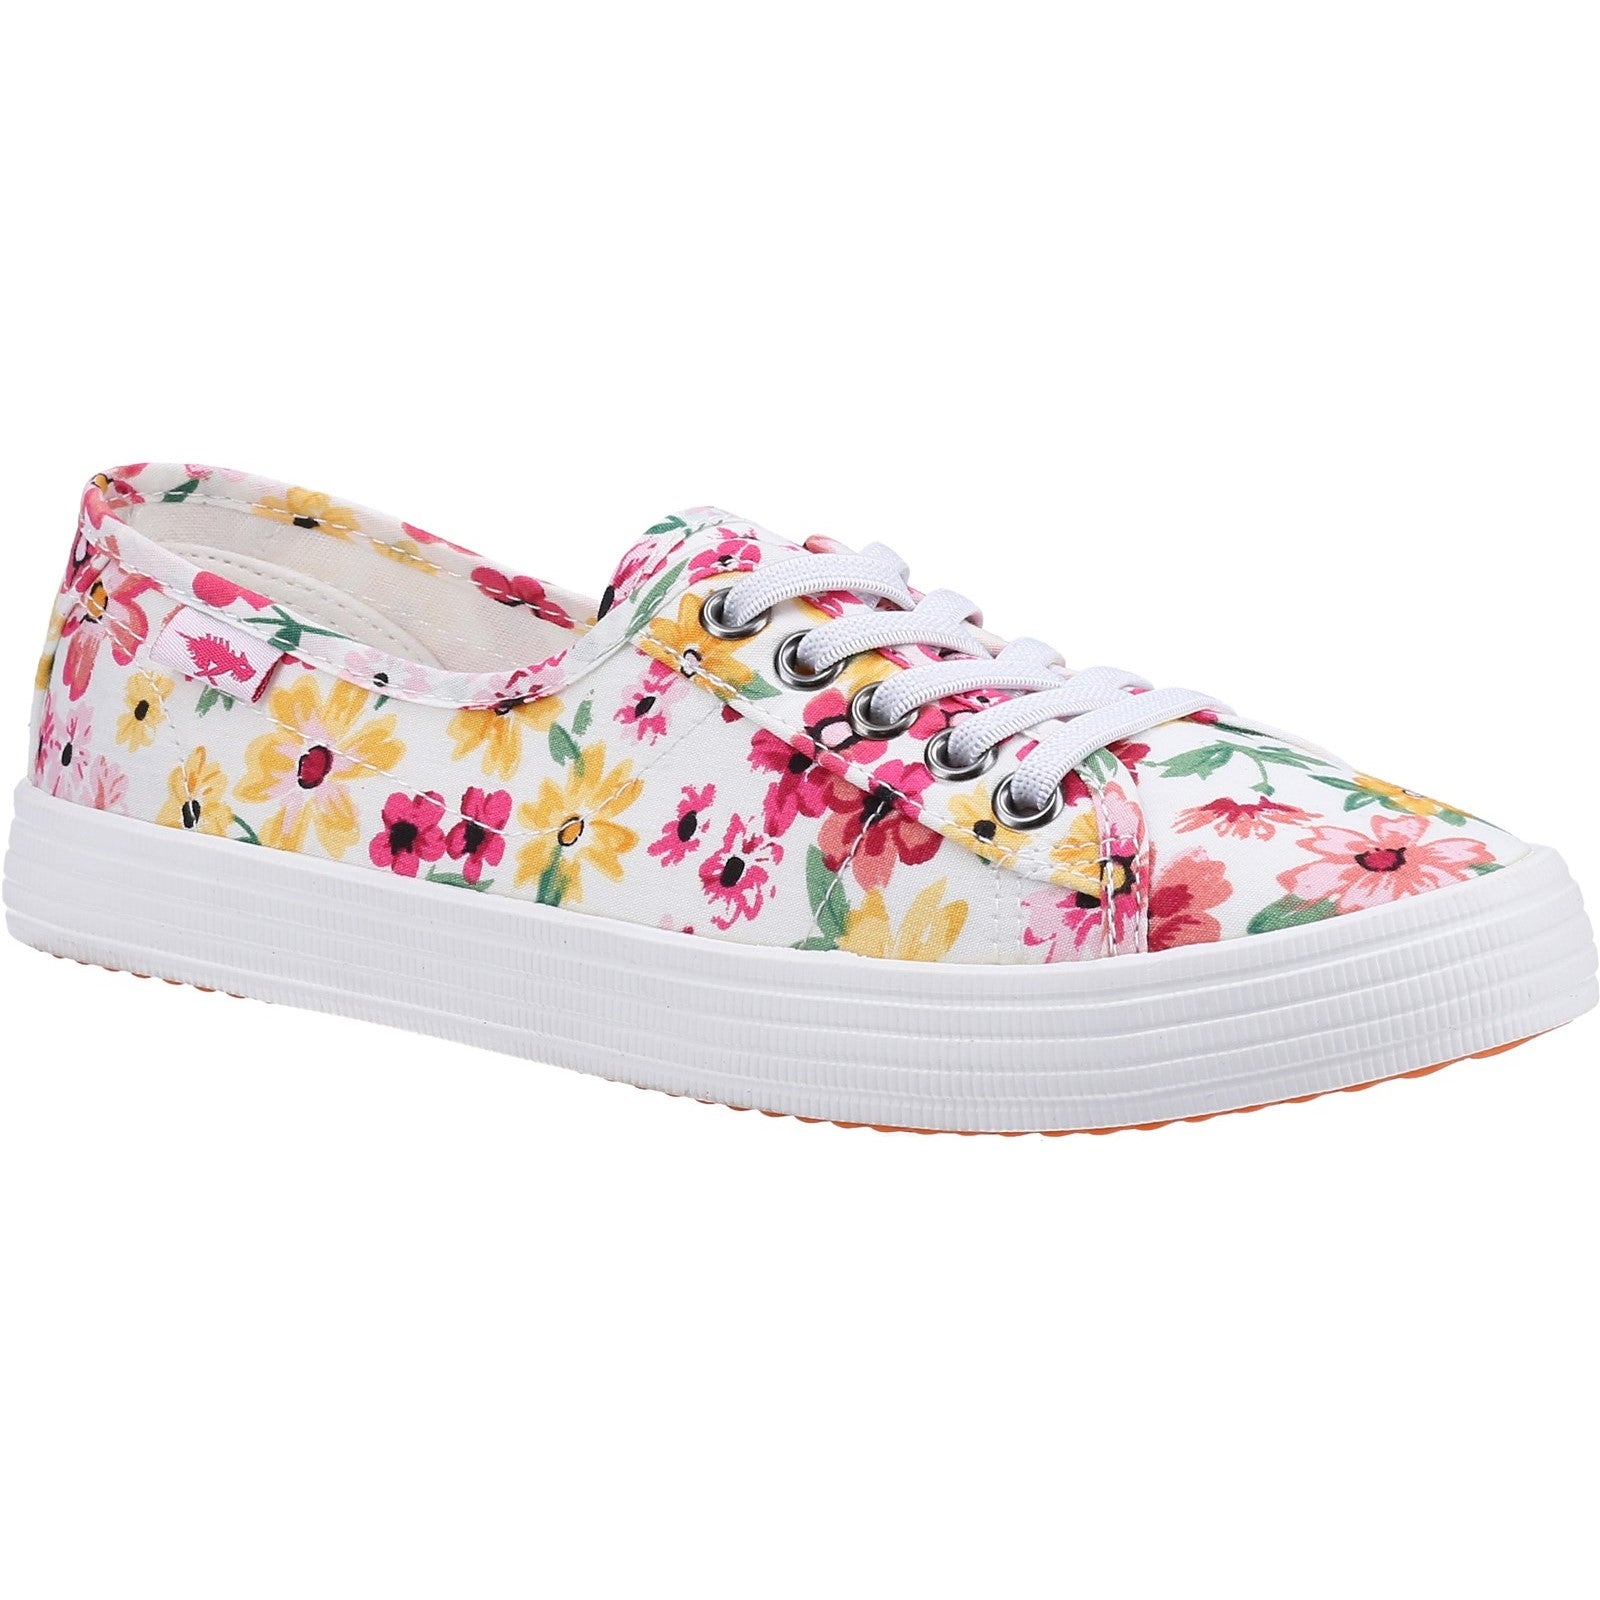 Rocket Dog Chow Chow Margate Floral Casual Shoe